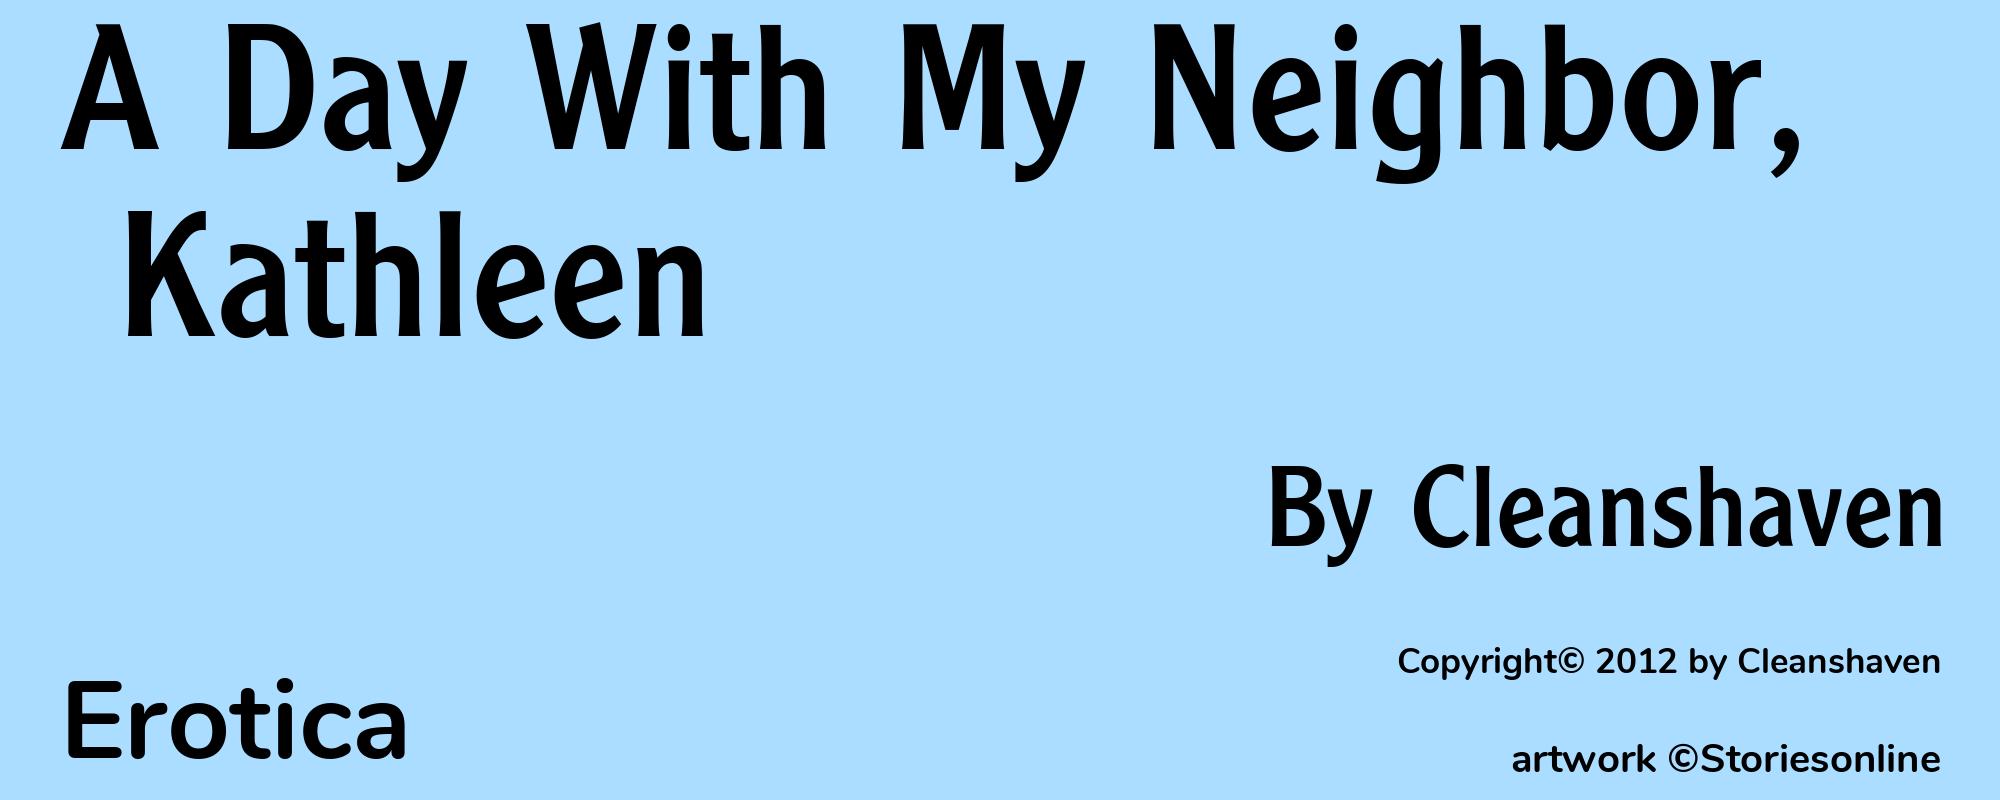 A Day With My Neighbor, Kathleen - Cover